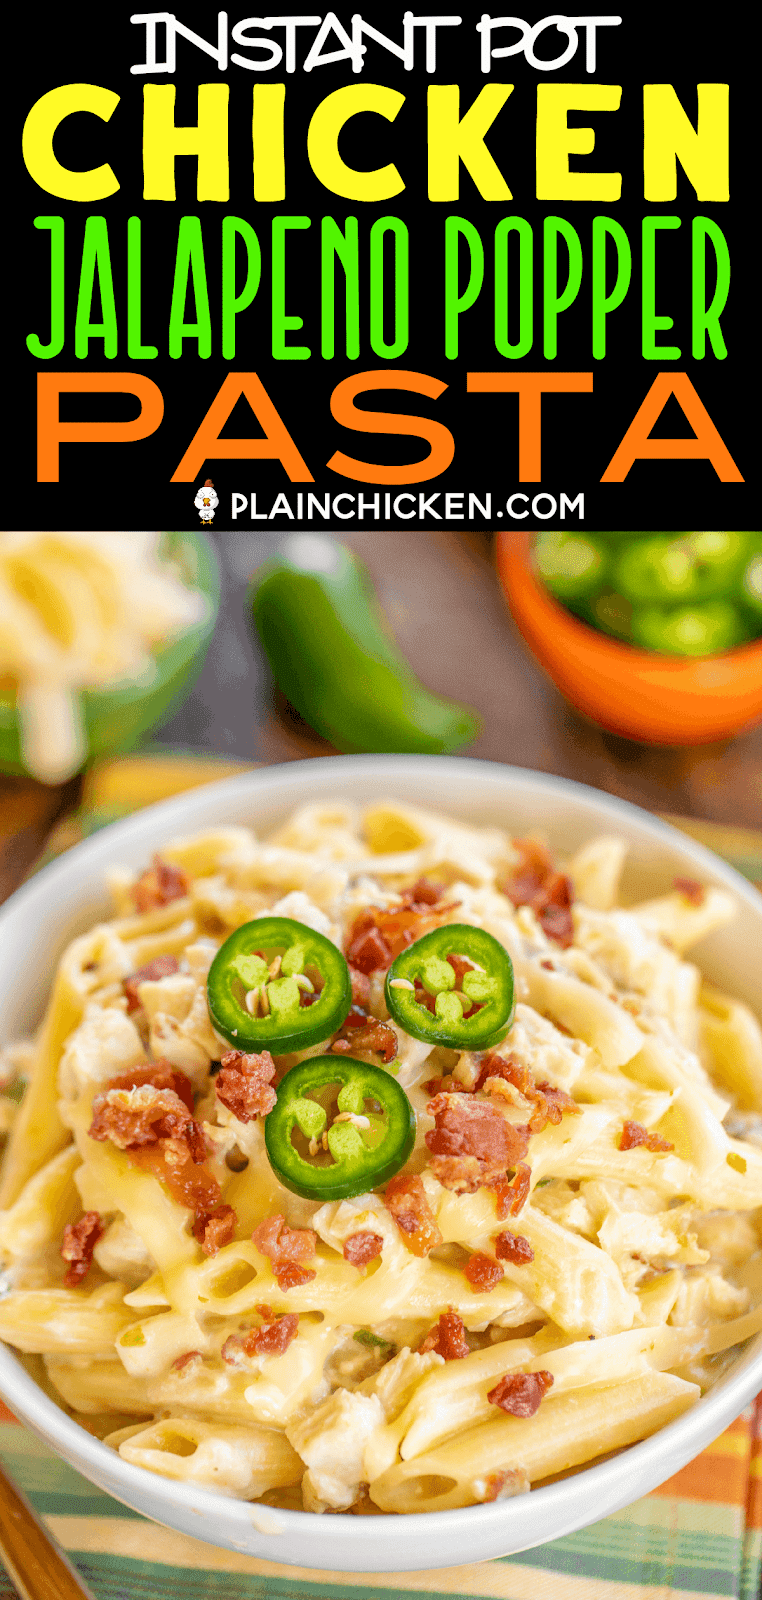 Instant Pot Chicken Jalapeño Popper Pasta - creamy chicken pasta loaded with bacon, jalapeños and pepper jack cheese! Seriously delicious! 4 minutes of cook time. We ate this two days in a row. Chicken, jalapeños, bacon, garlic, onion, chicken broth, water, cream cheese, penne pasta and pepper jack cheese. Everyone cleaned their plate! Even our picky eaters!! #chicken #InstantPot #pasta